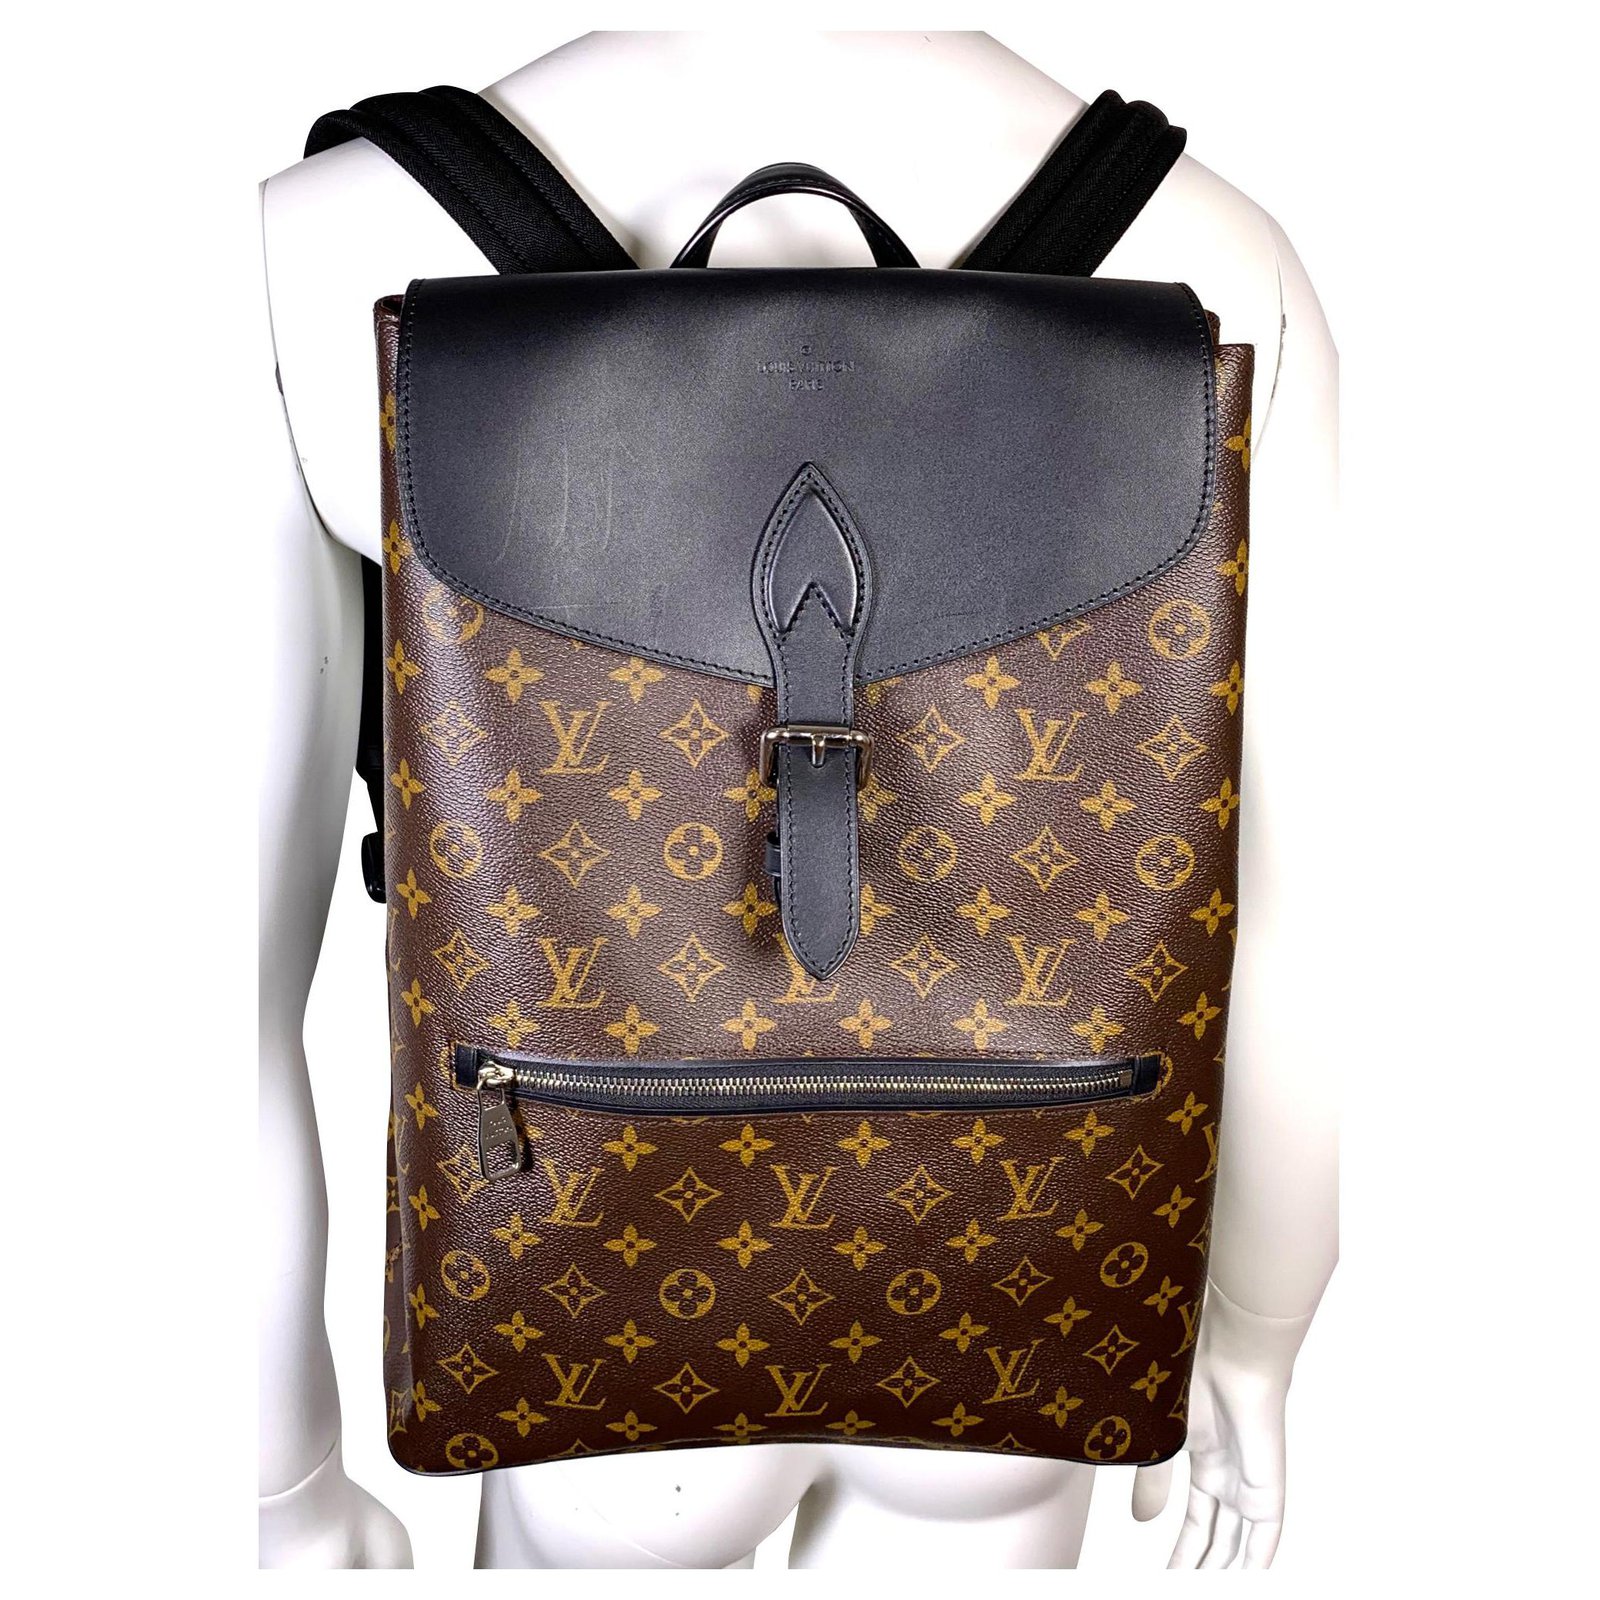 Louis Vuitton Palk Brown Canvas Backpack Bag (Pre-Owned)